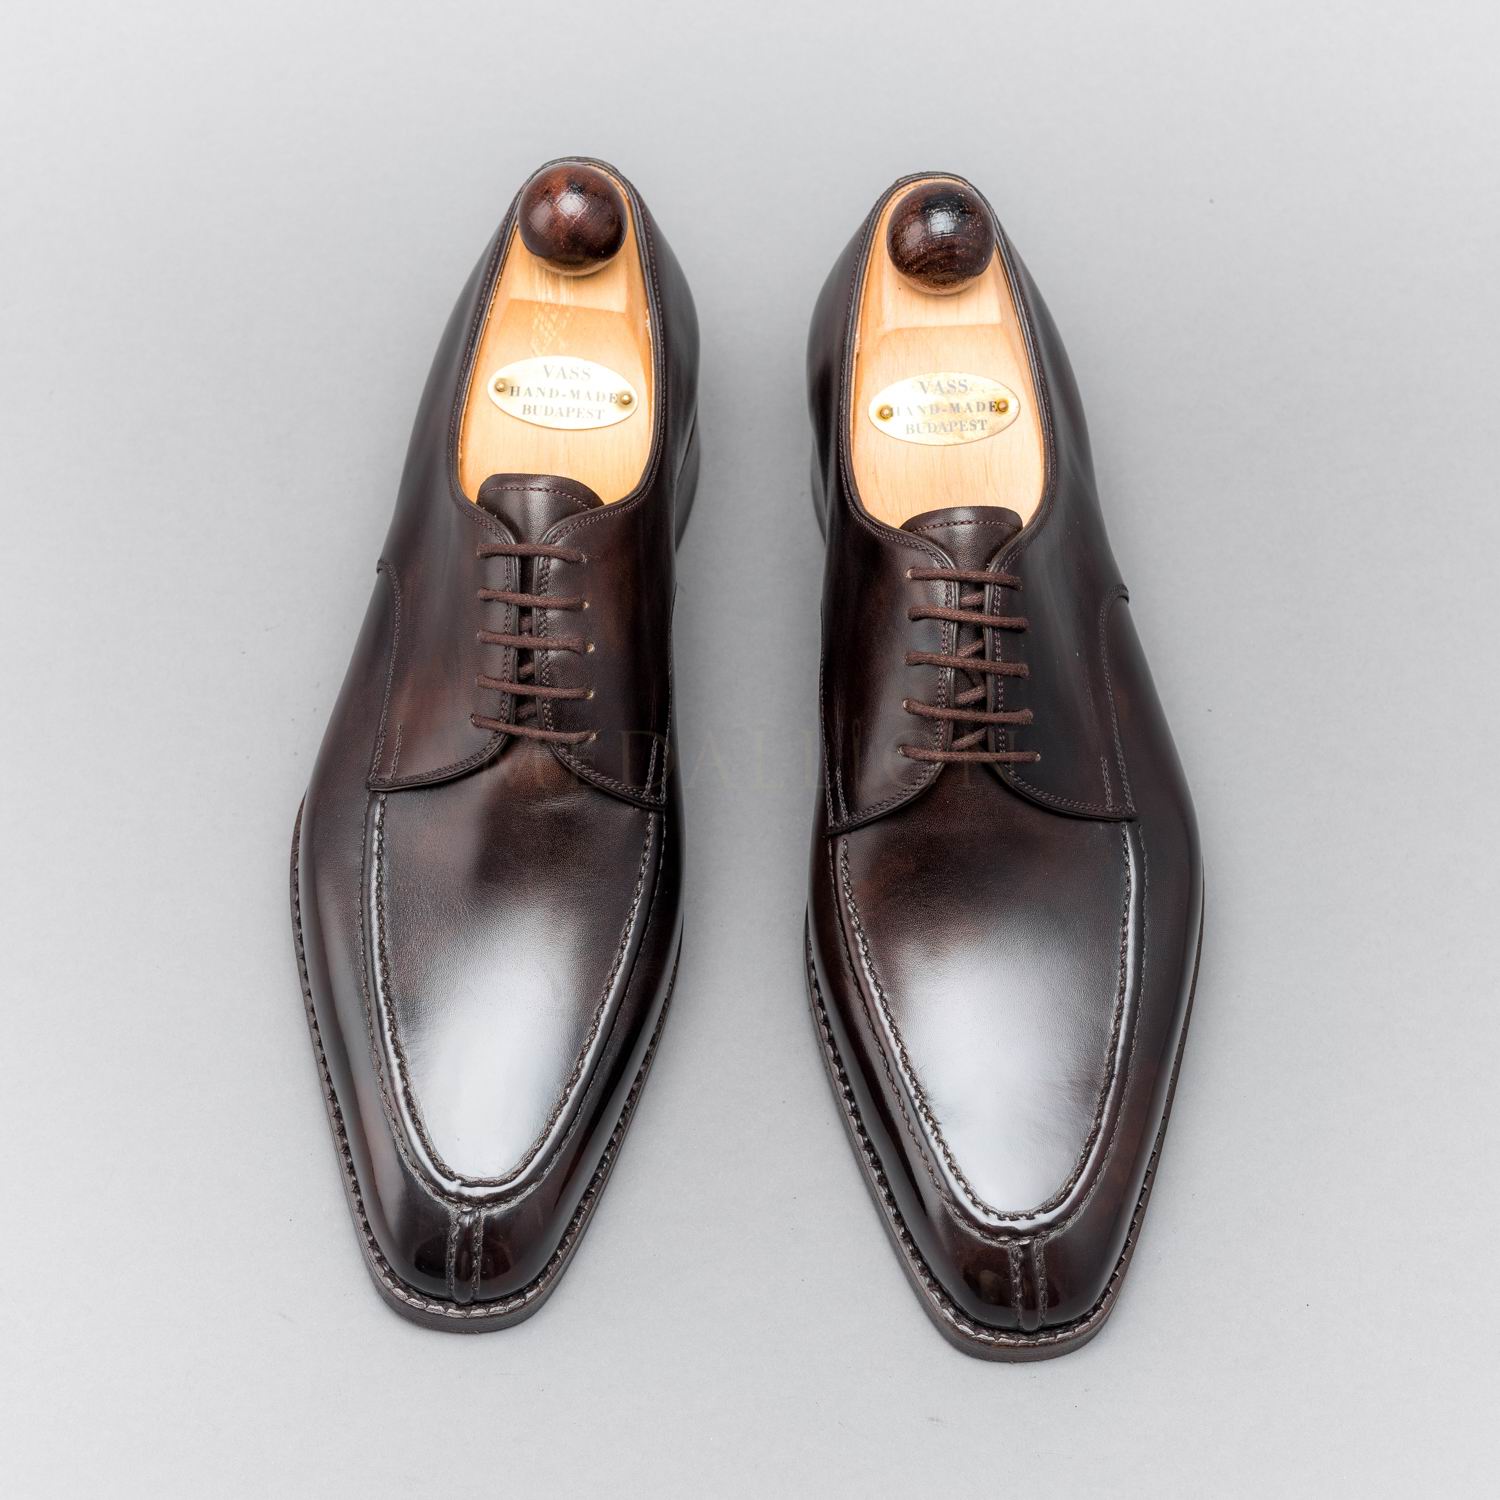 VASS, Apron Derby, Hungary – Medallion Shoes